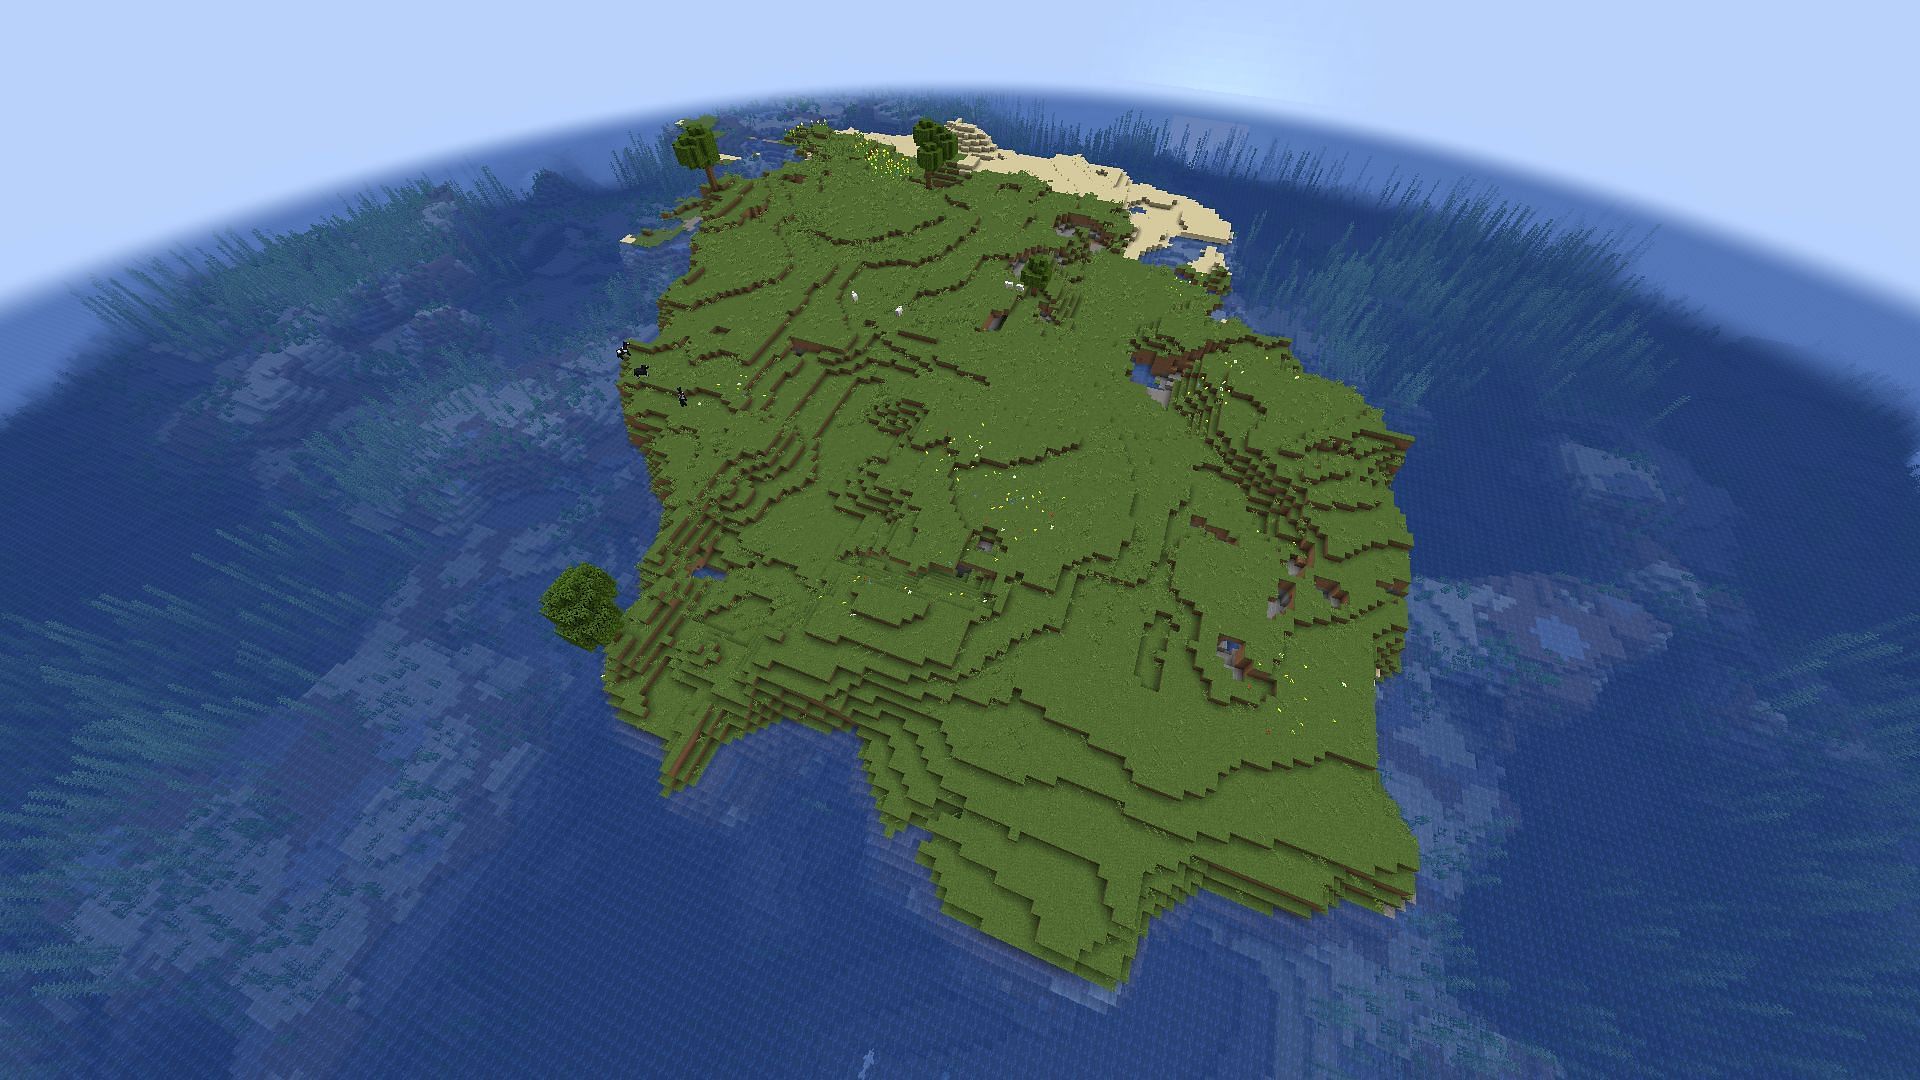 Surviving in an island is quite unique compared to regular land mass in Minecraft (Image via Mojang)